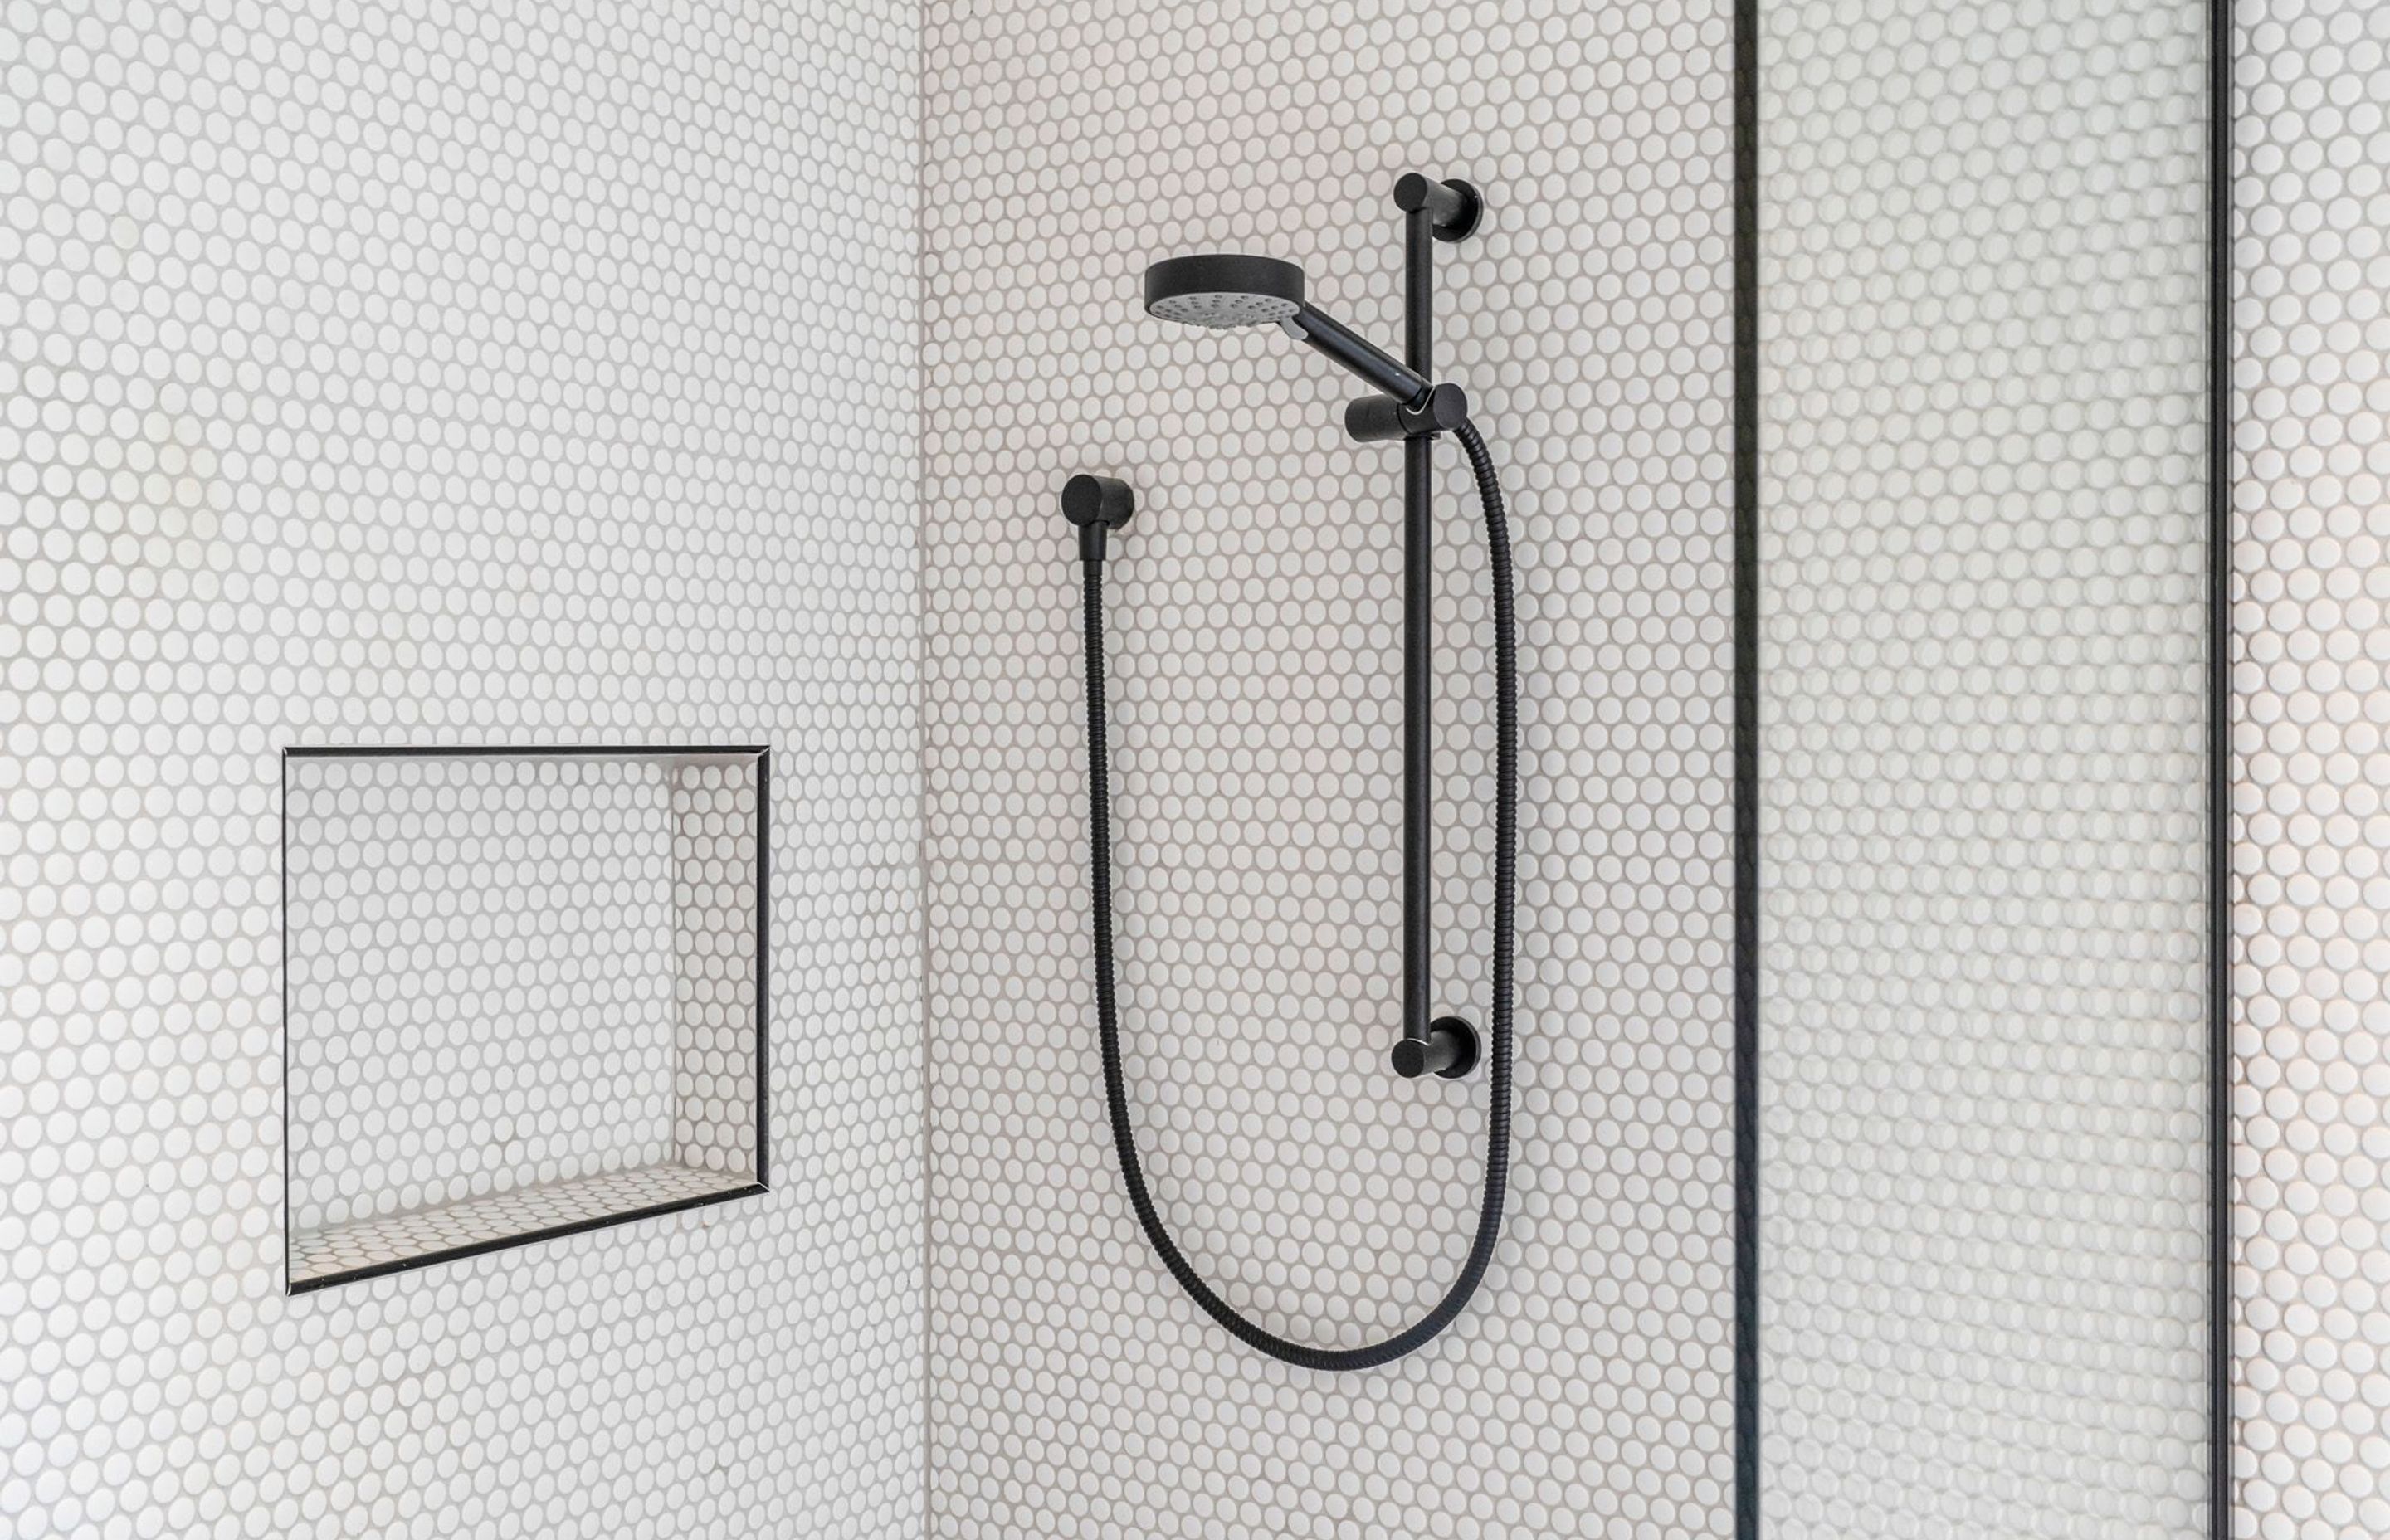 This monochromatic shower in the family bathroom contrasts modern black tapware against the small circular tiles.